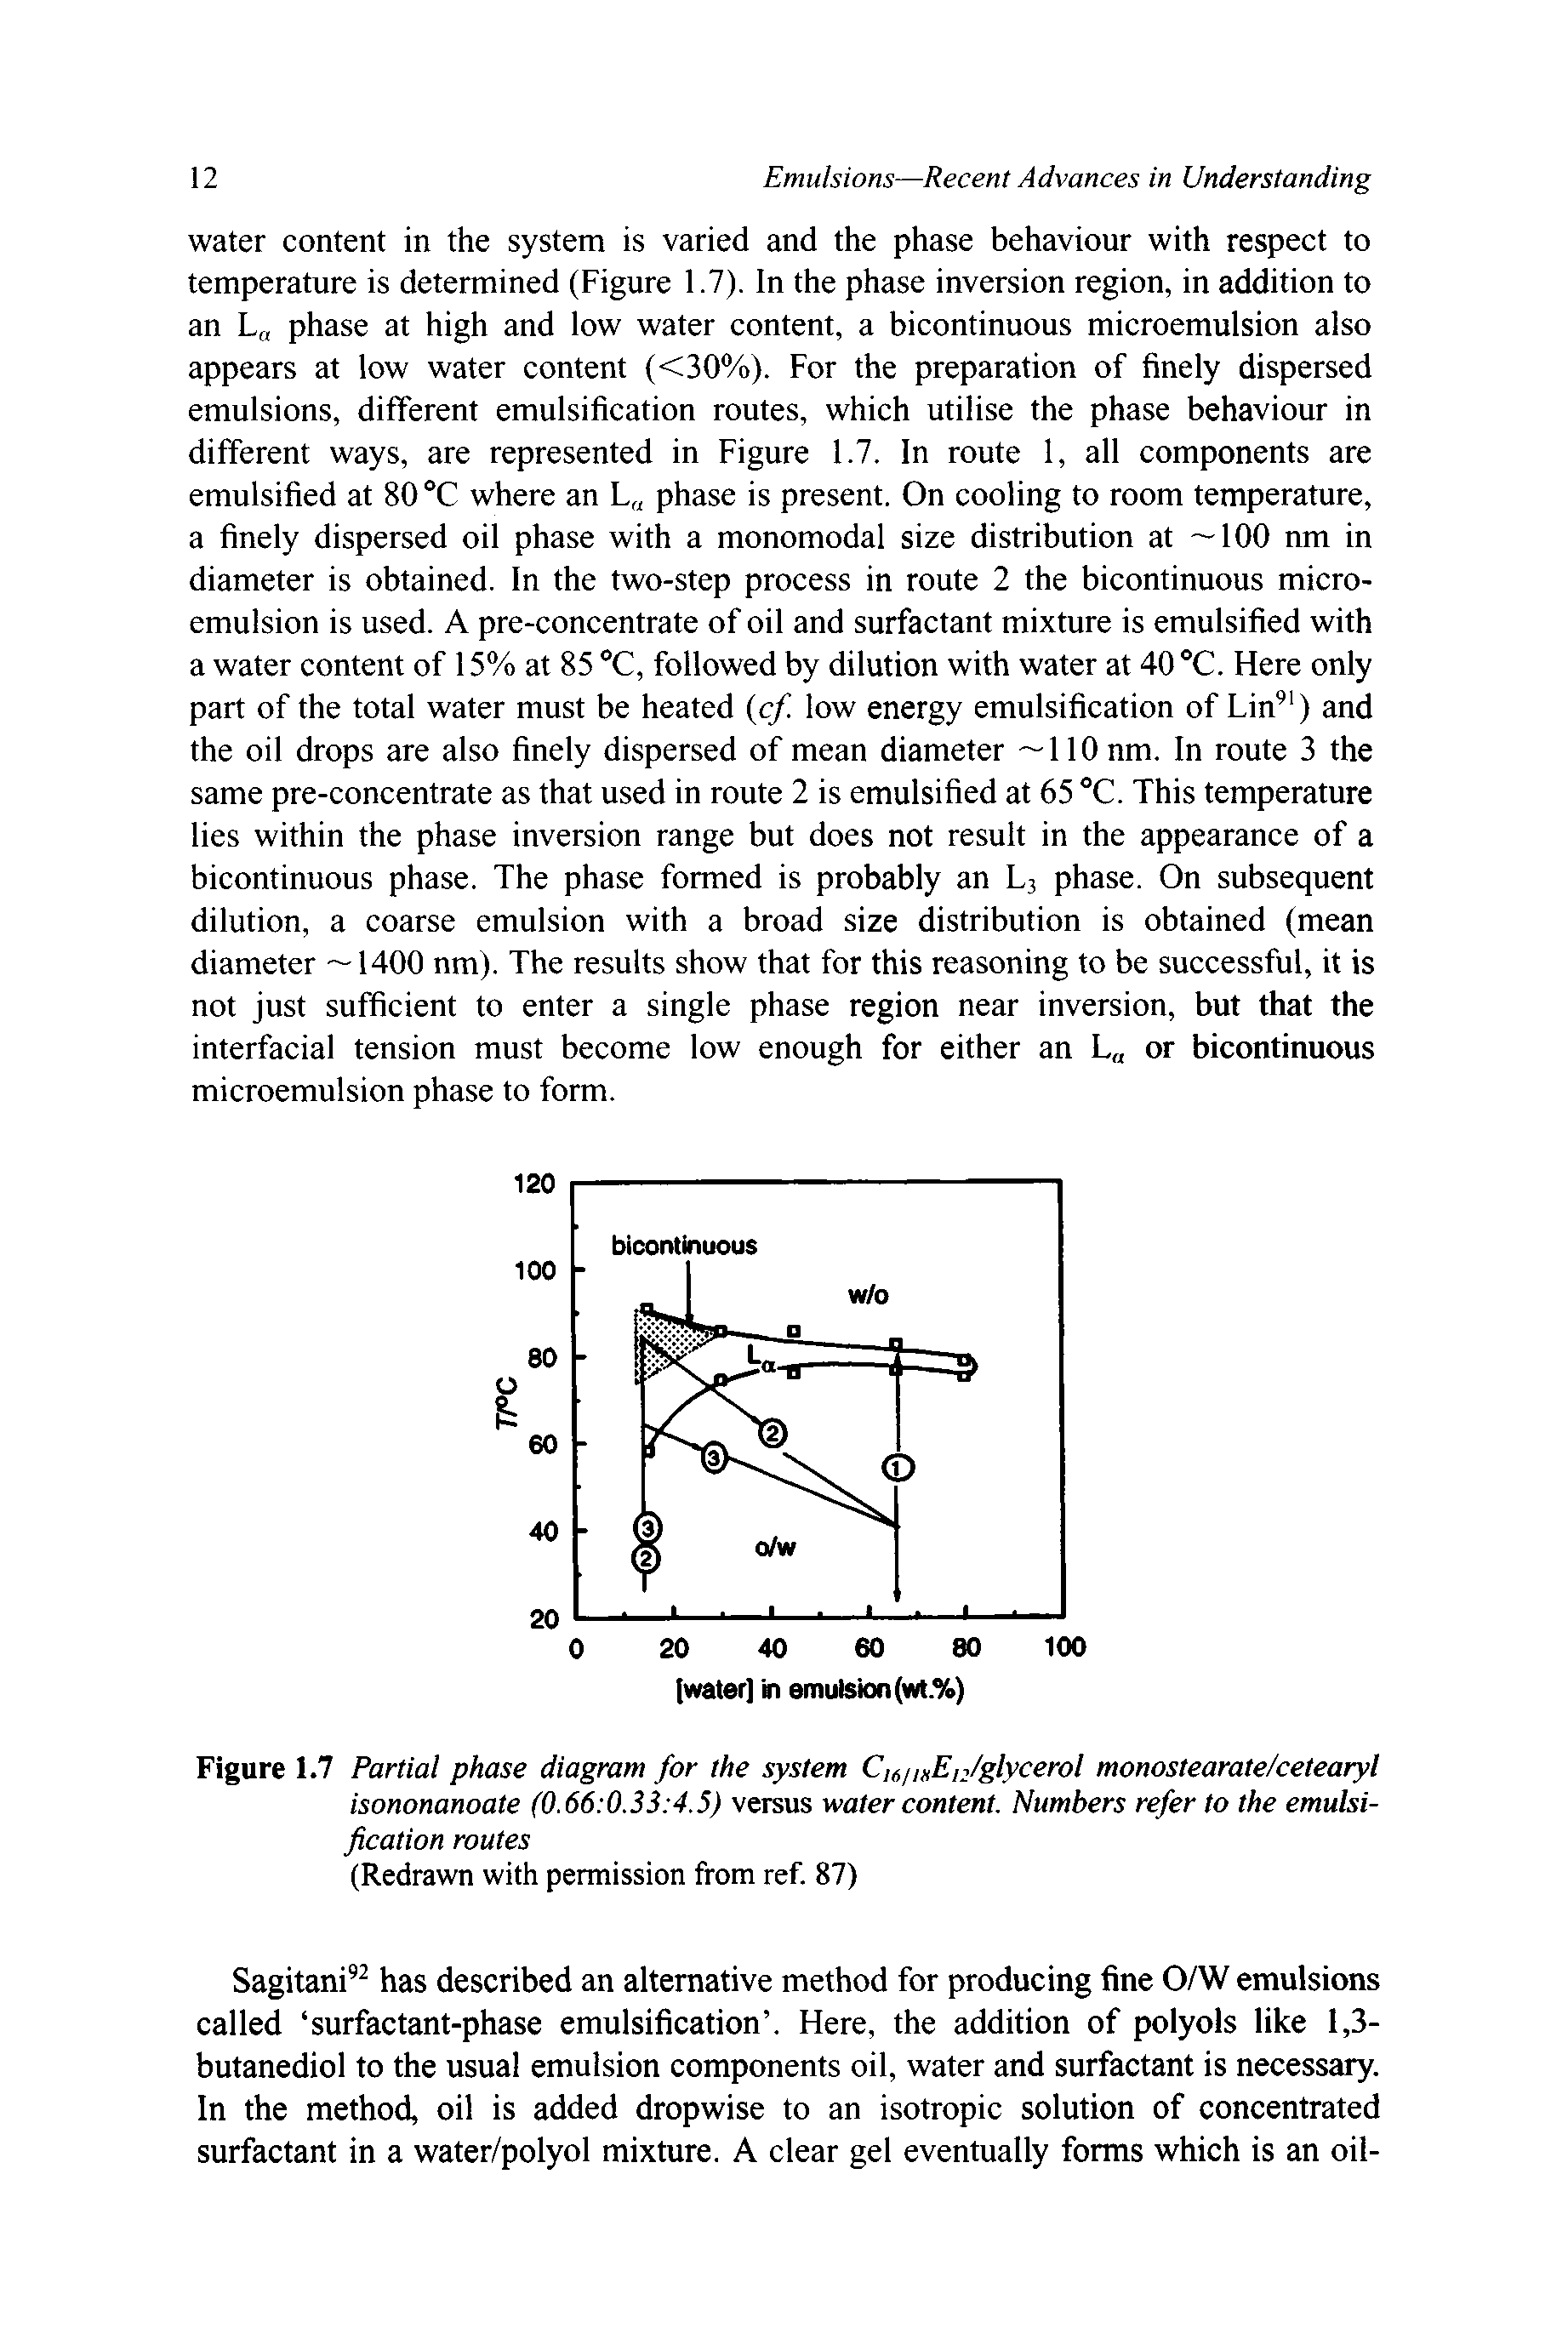 Figure 1.7 Partial phase diagram for the system C/t/mEij/glycerol monostearate/cetearyl isononanoate (0.66 0.33 4.5) versus water content. Numbers refer to the emulsification routes...